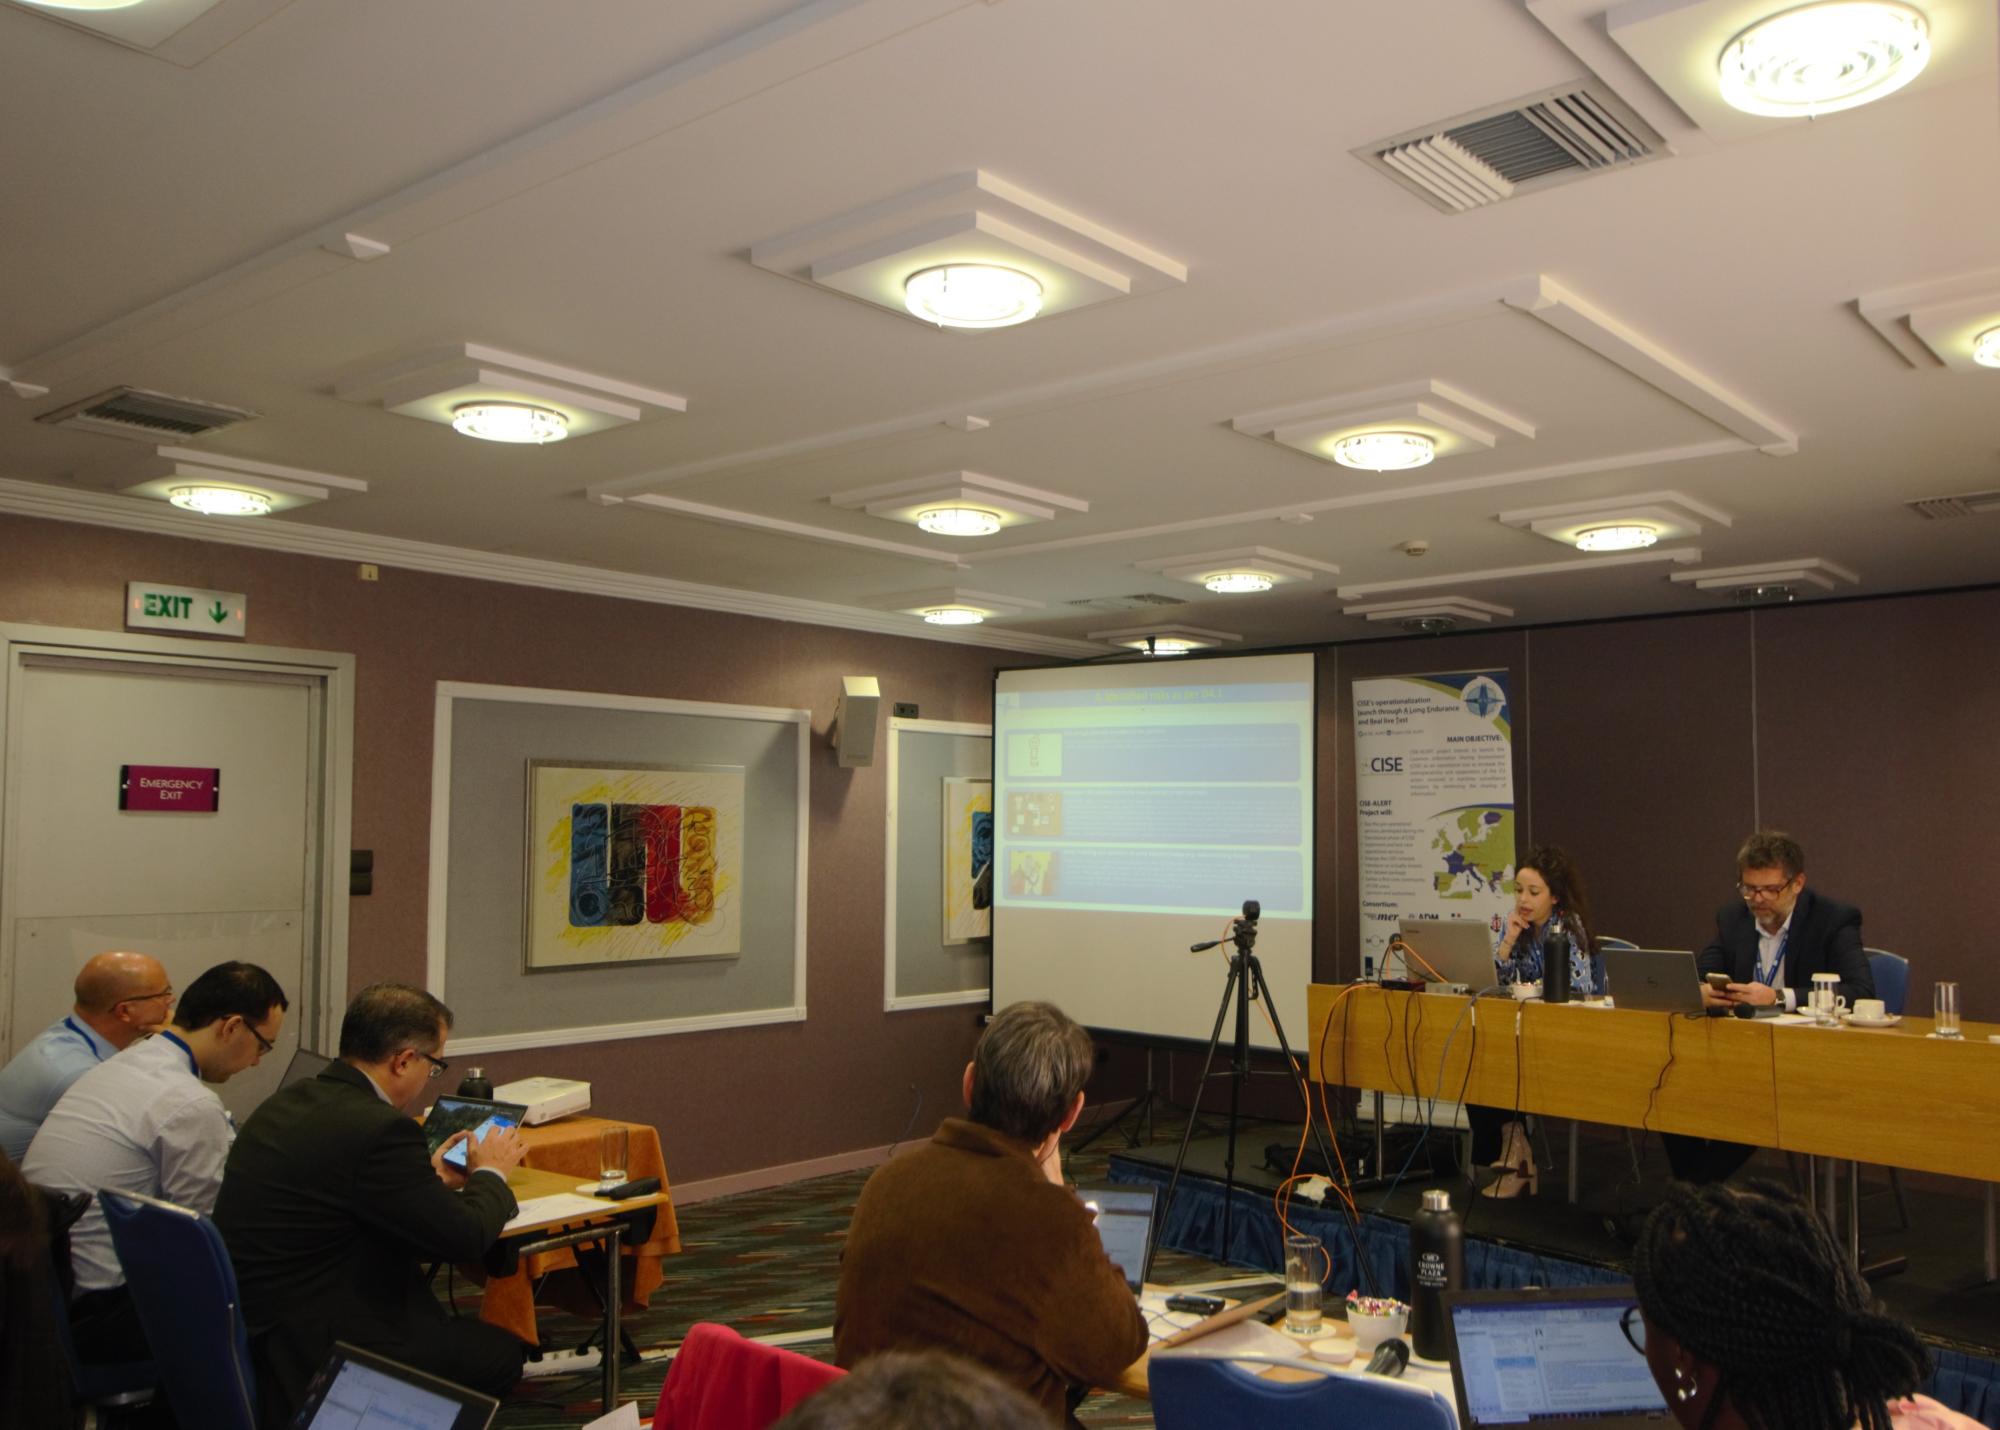 1st Review Meeting and 3rd Consortium Meeting of Project CISE-ALERT